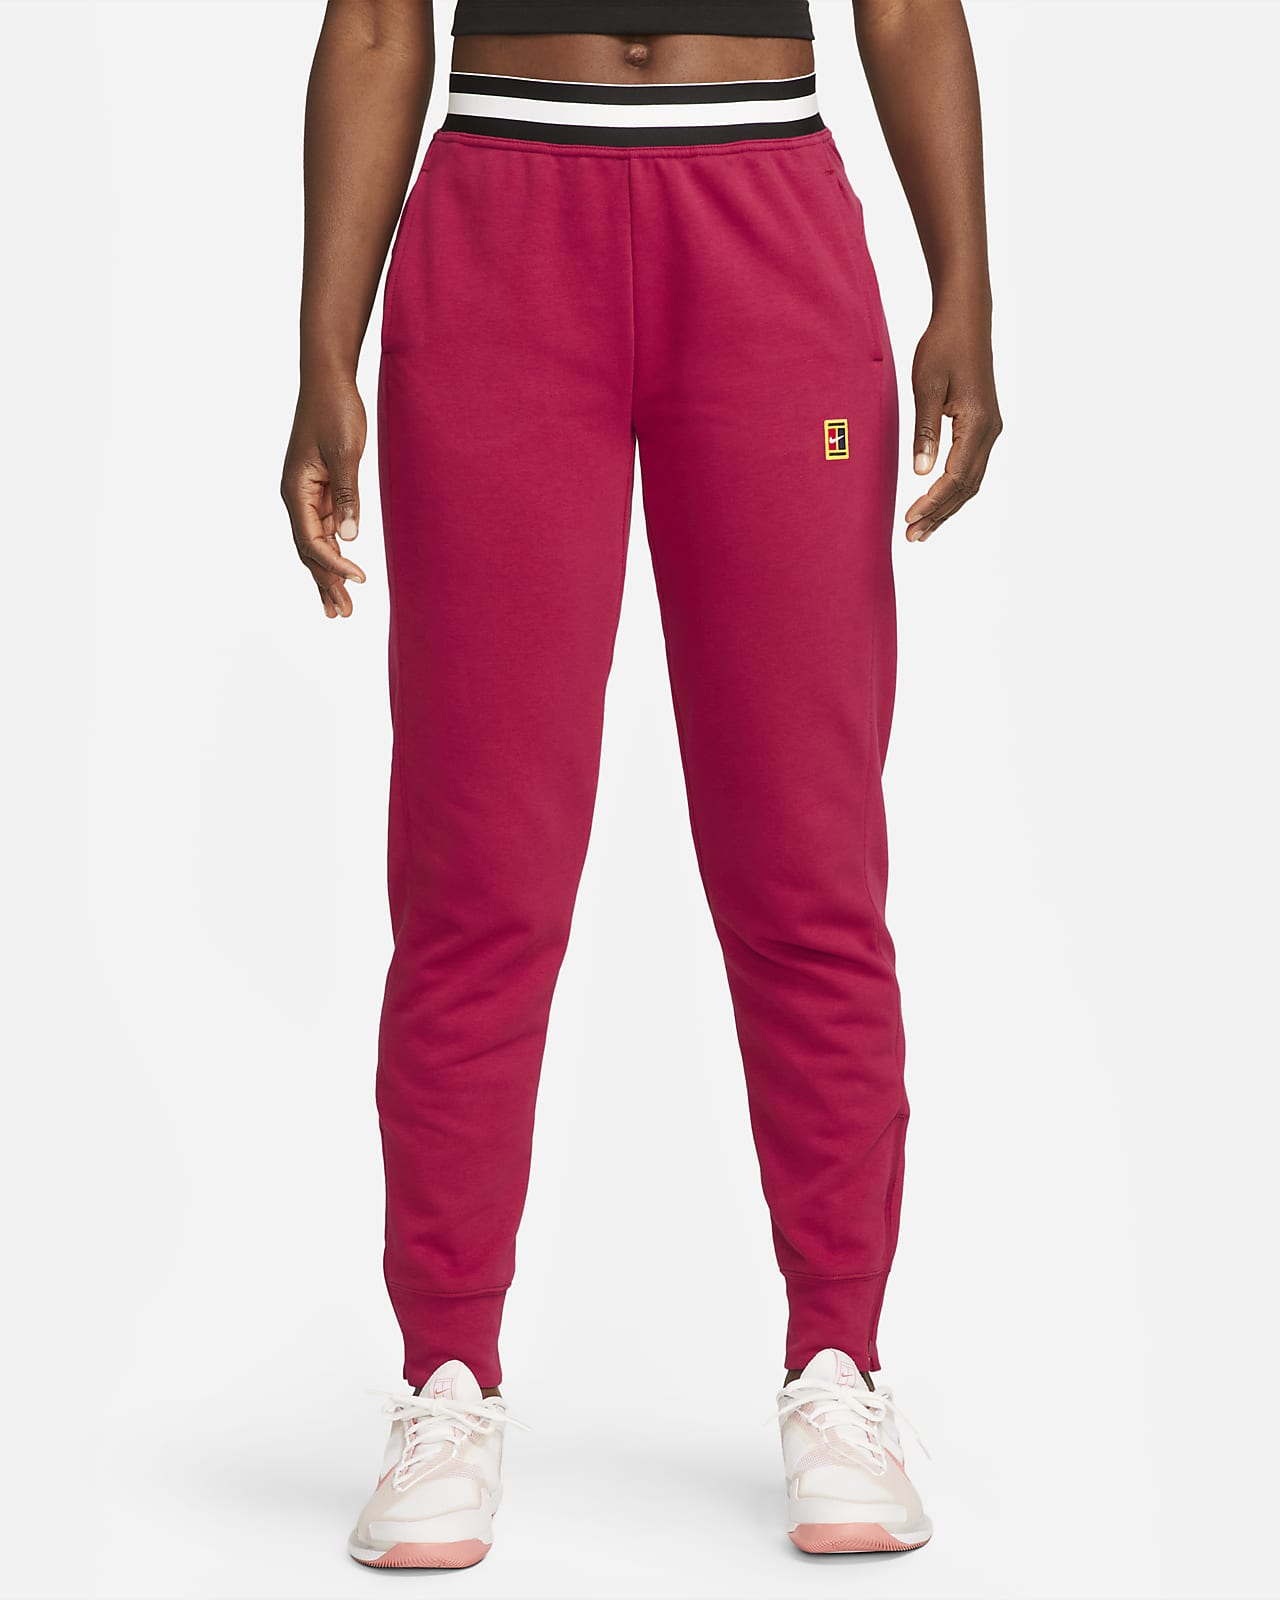 https://static.nike.com/a/images/t_PDP_1280_v1/f_auto,q_auto:eco/931a946b-43c3-405c-965f-5af006d26d2c/nikecourt-dri-fit-heritage-french-terry-tennis-trousers-W1tbCt.png